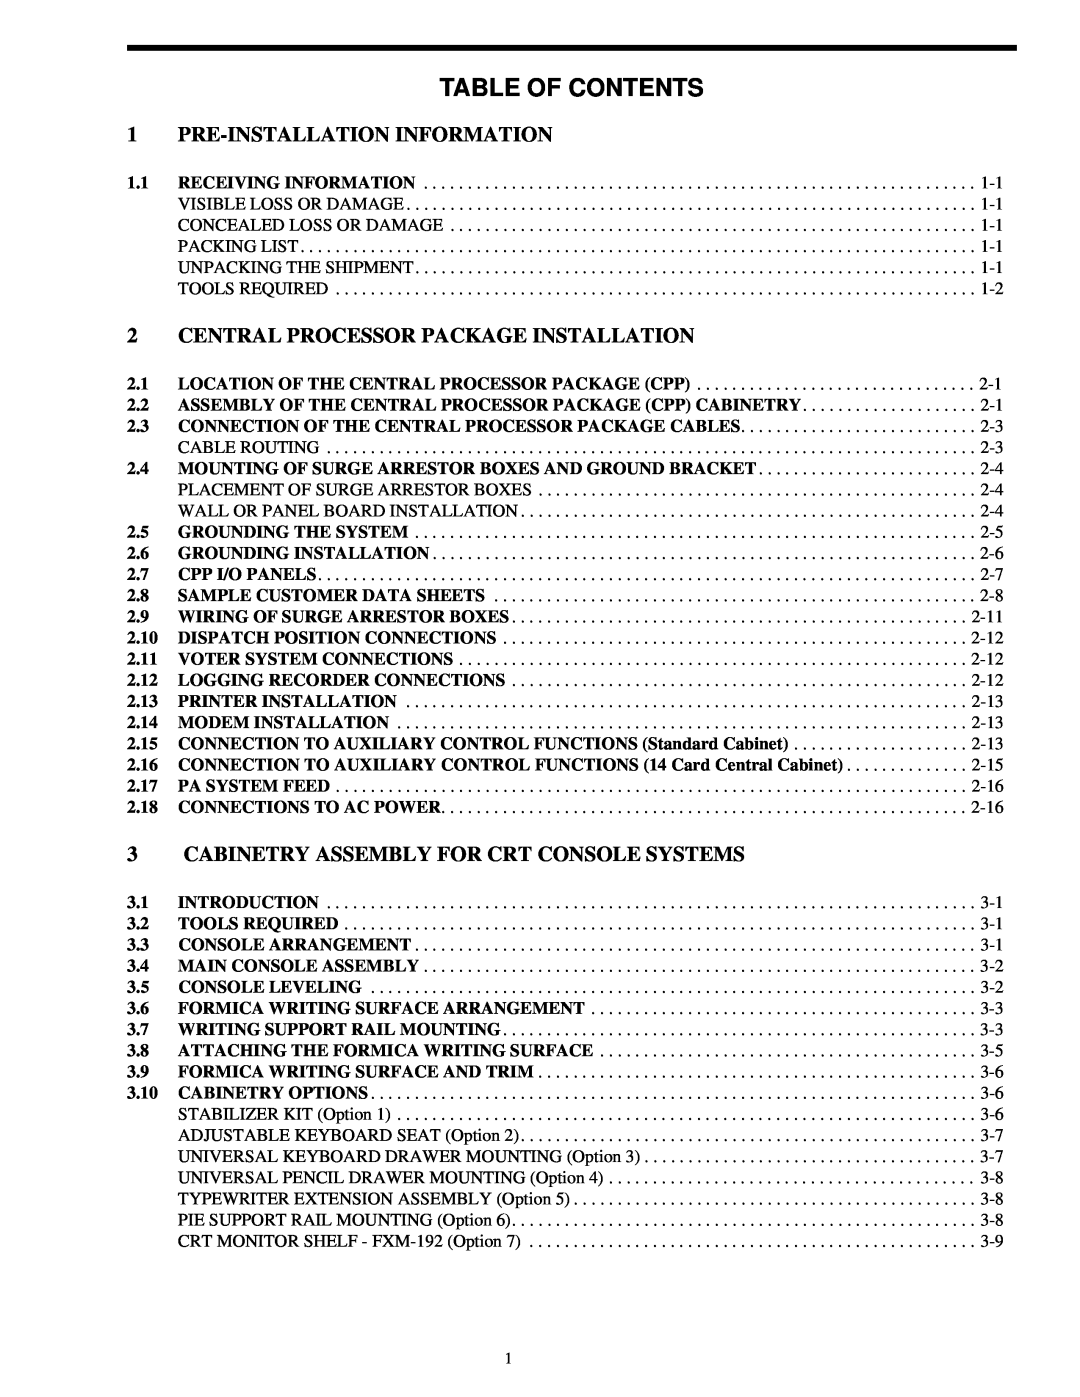 EFJohnson VR-CM50 manual Table Of Contents, Pre-Installationinformation, Central Processor Package Installation 